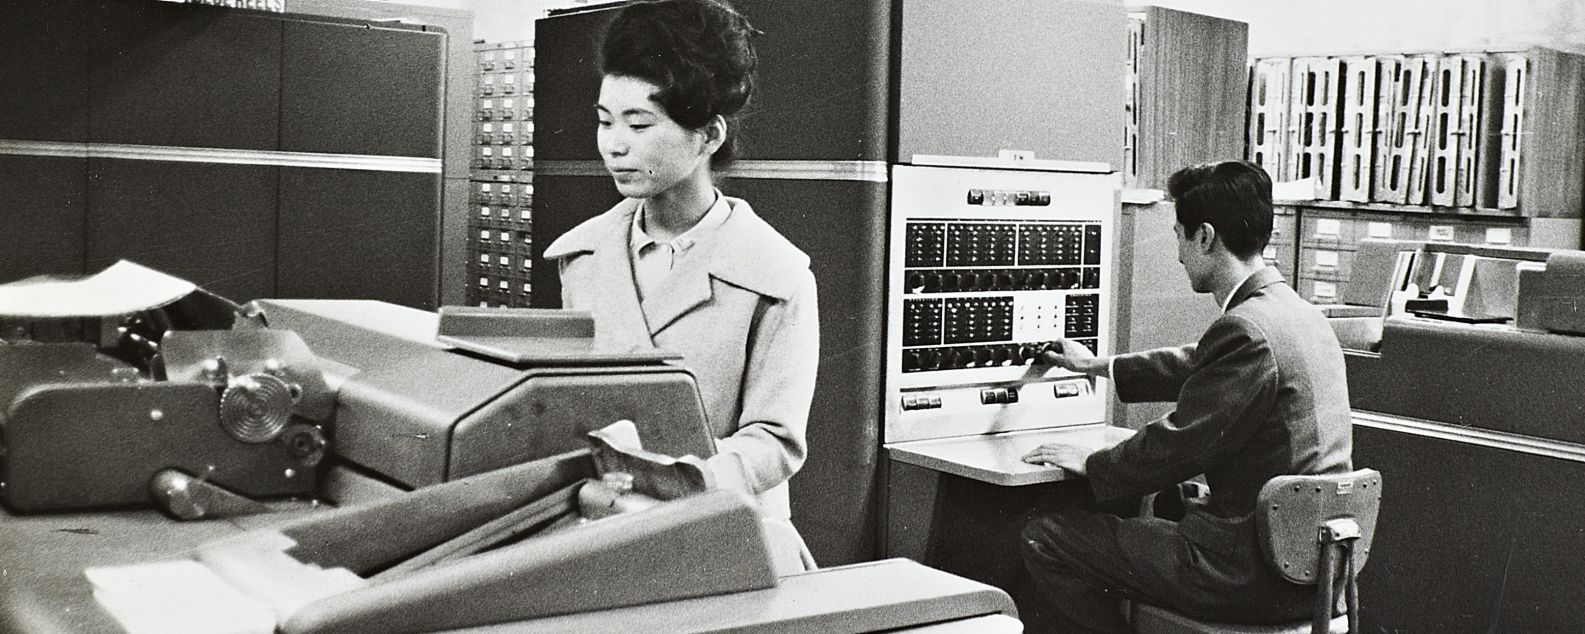 A man and woman working in a computer room